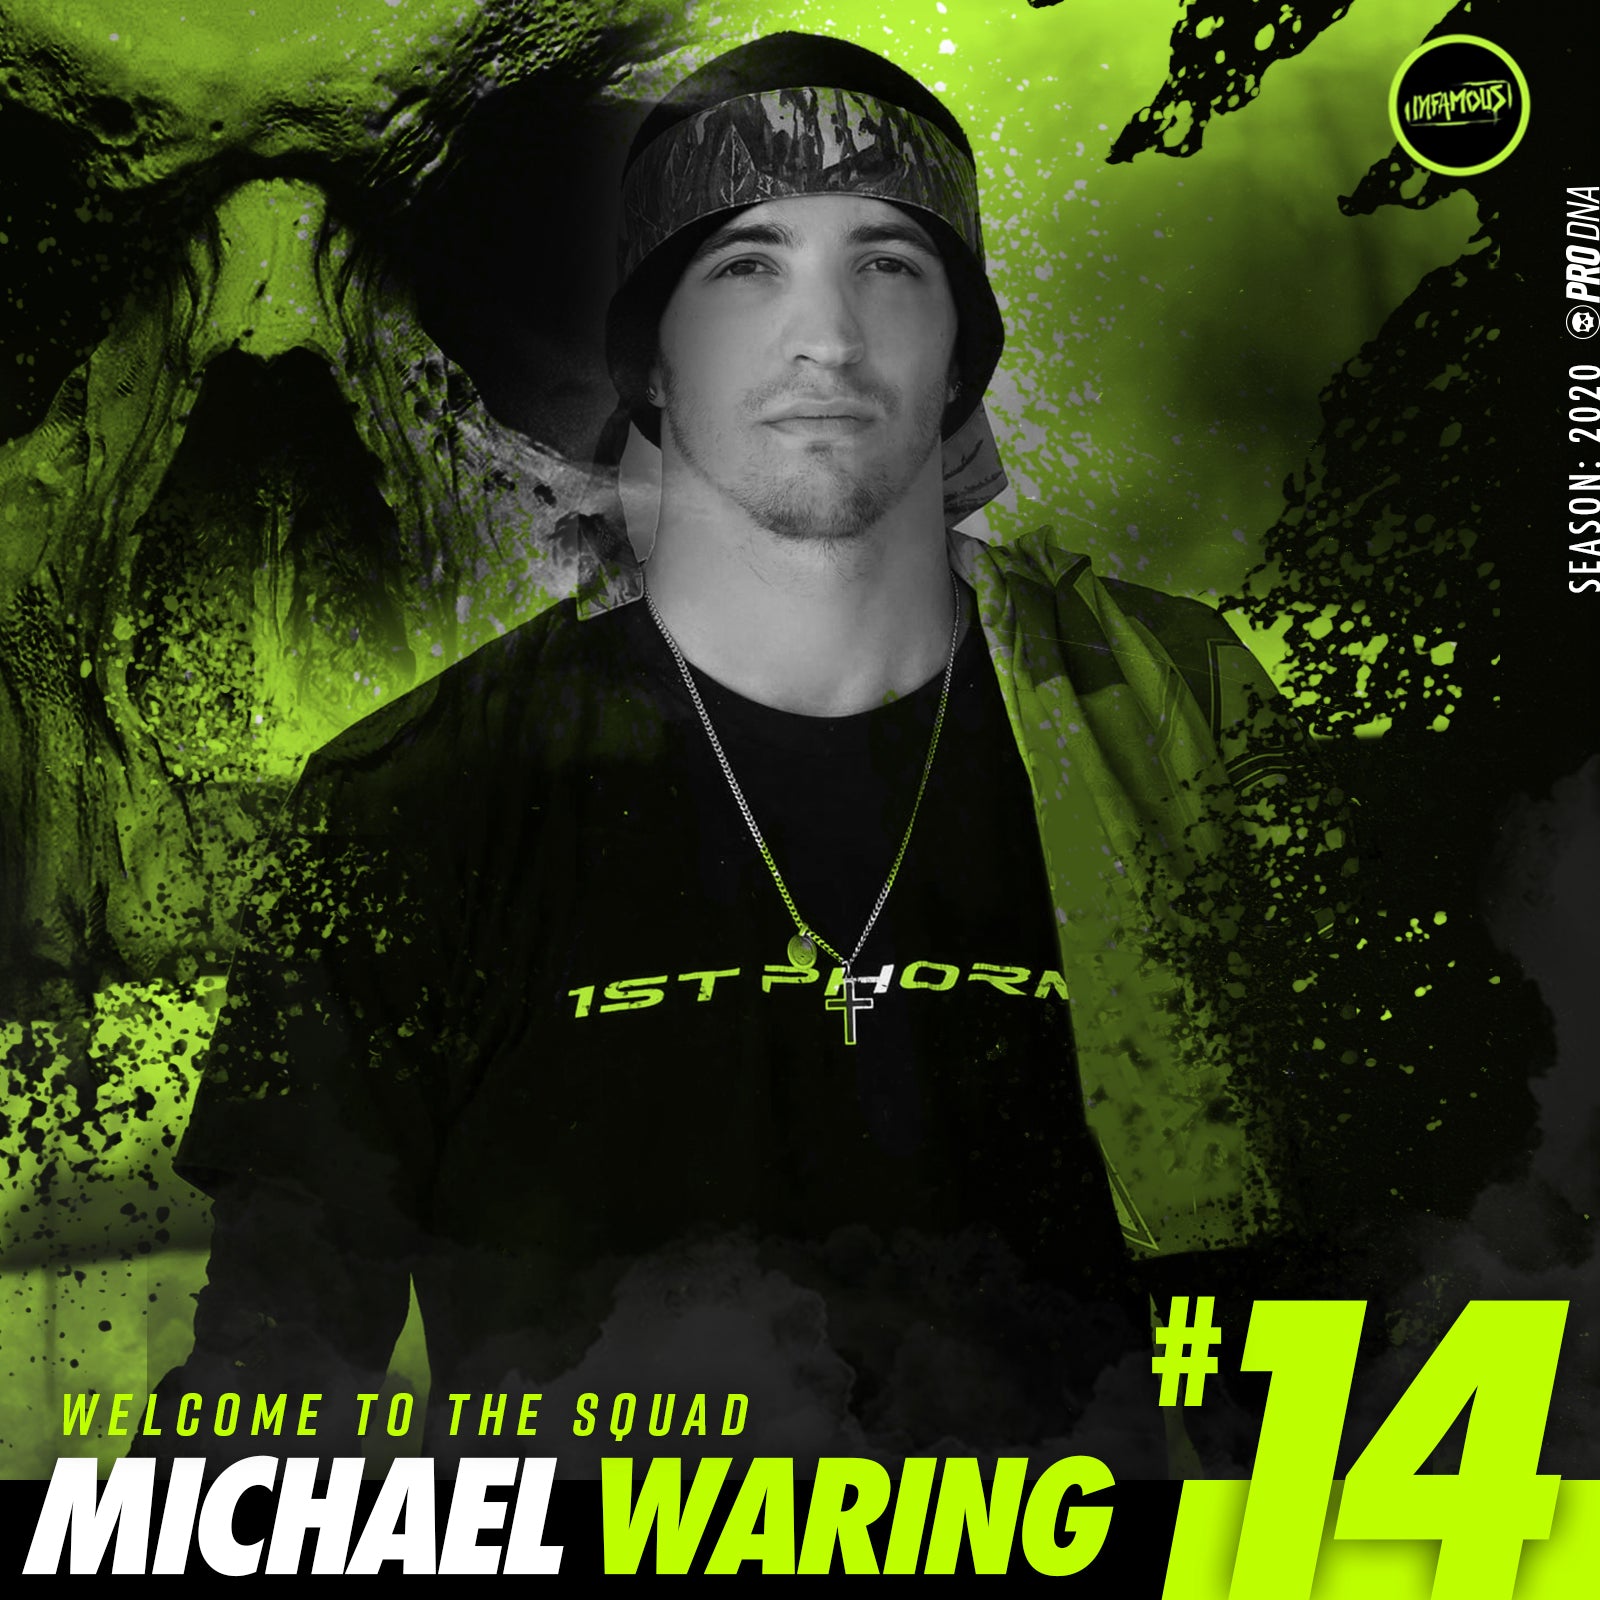 MICHAEL WARING signs with infamous for 2020 season